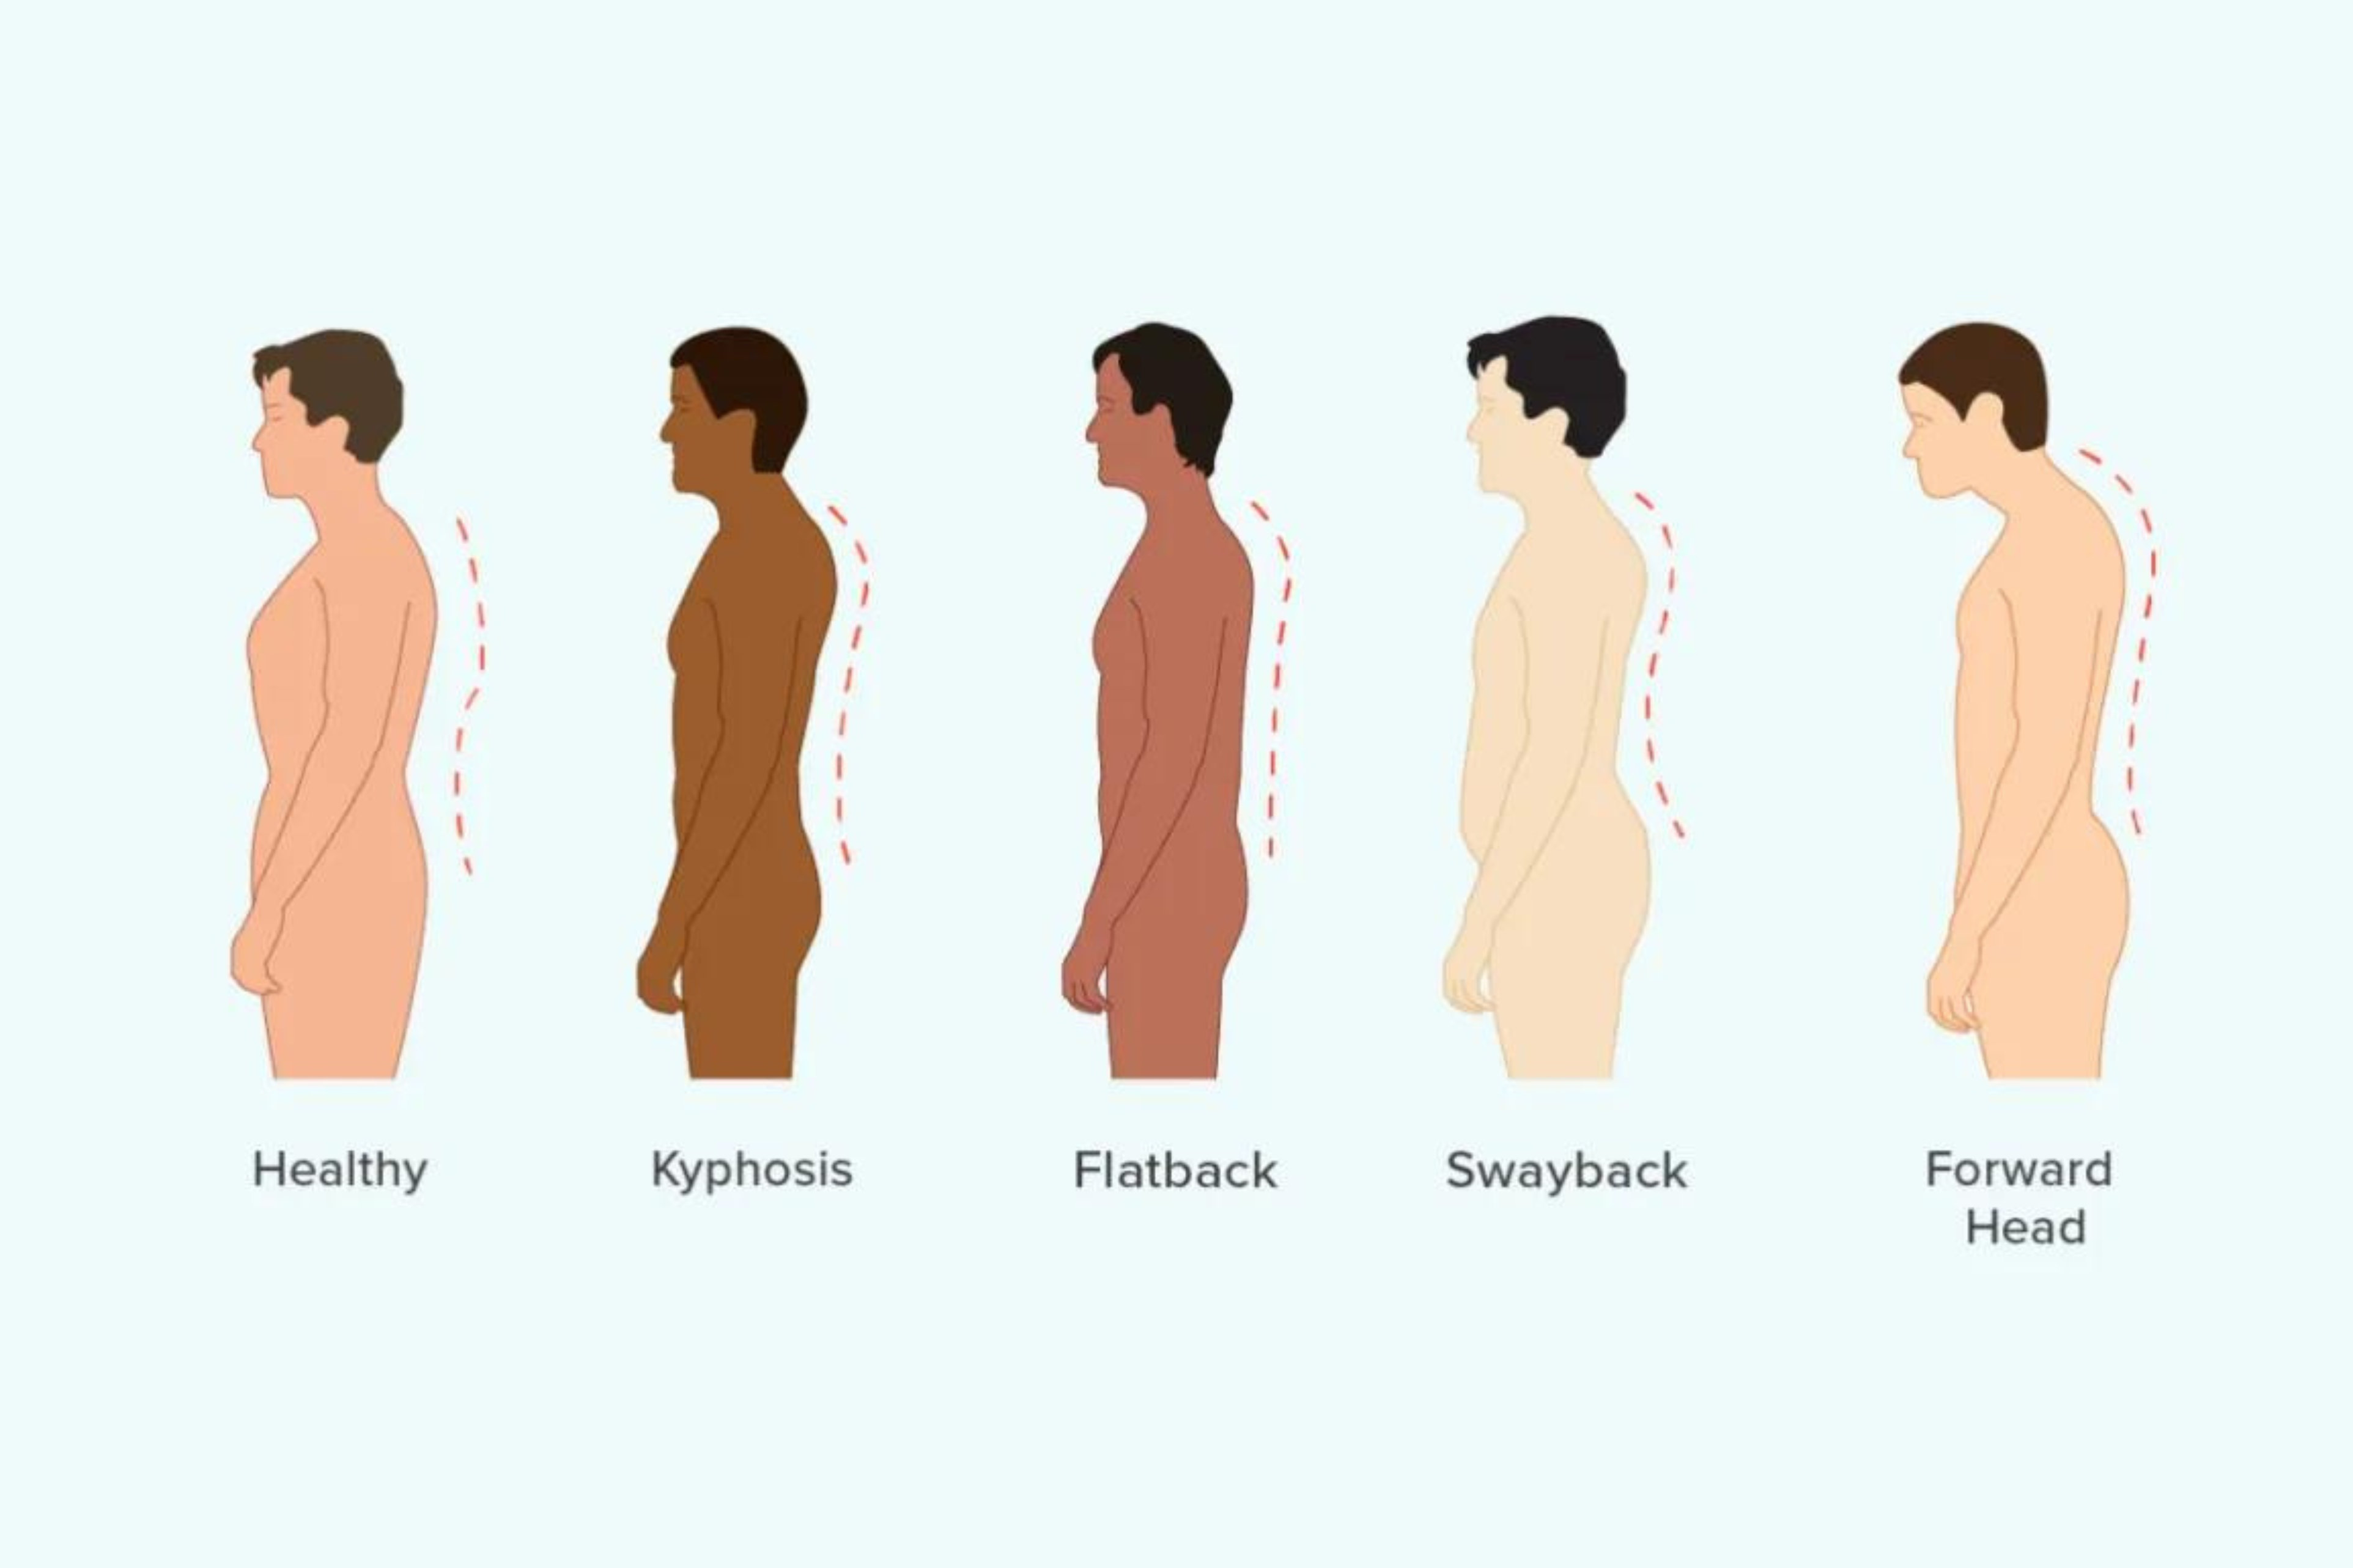 Correcting Swayback Posture with Chiropractic Care